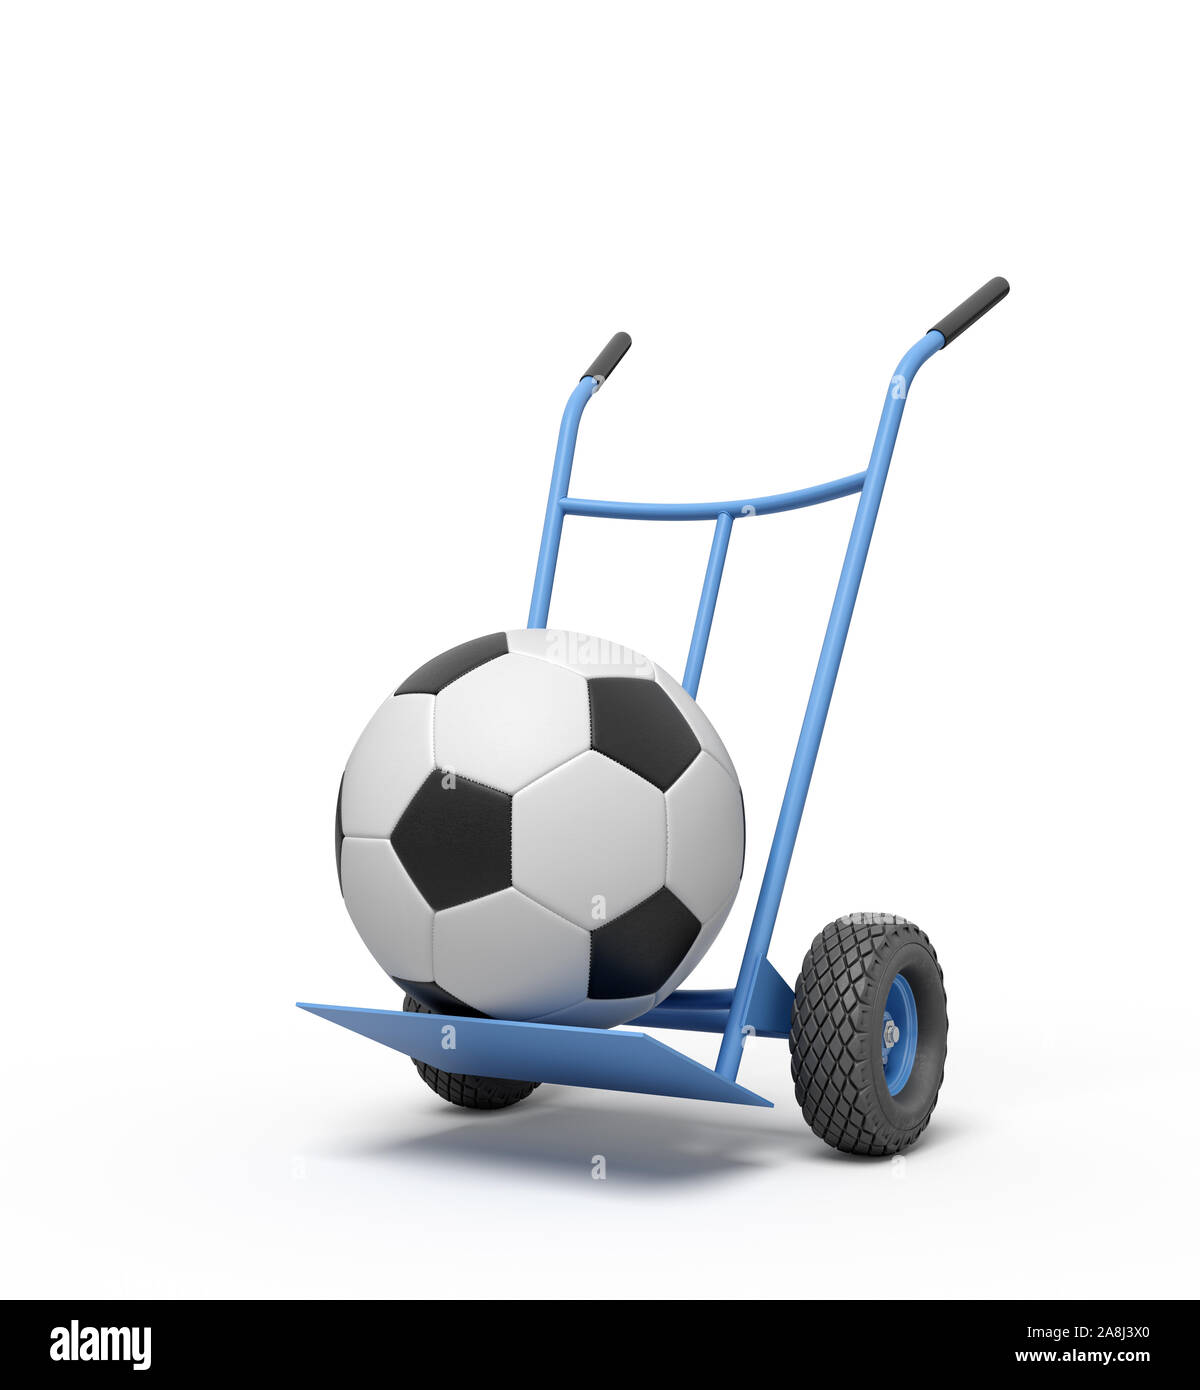 3d rendering of navy blue hand truck standing upright with football on it. Stock Photo